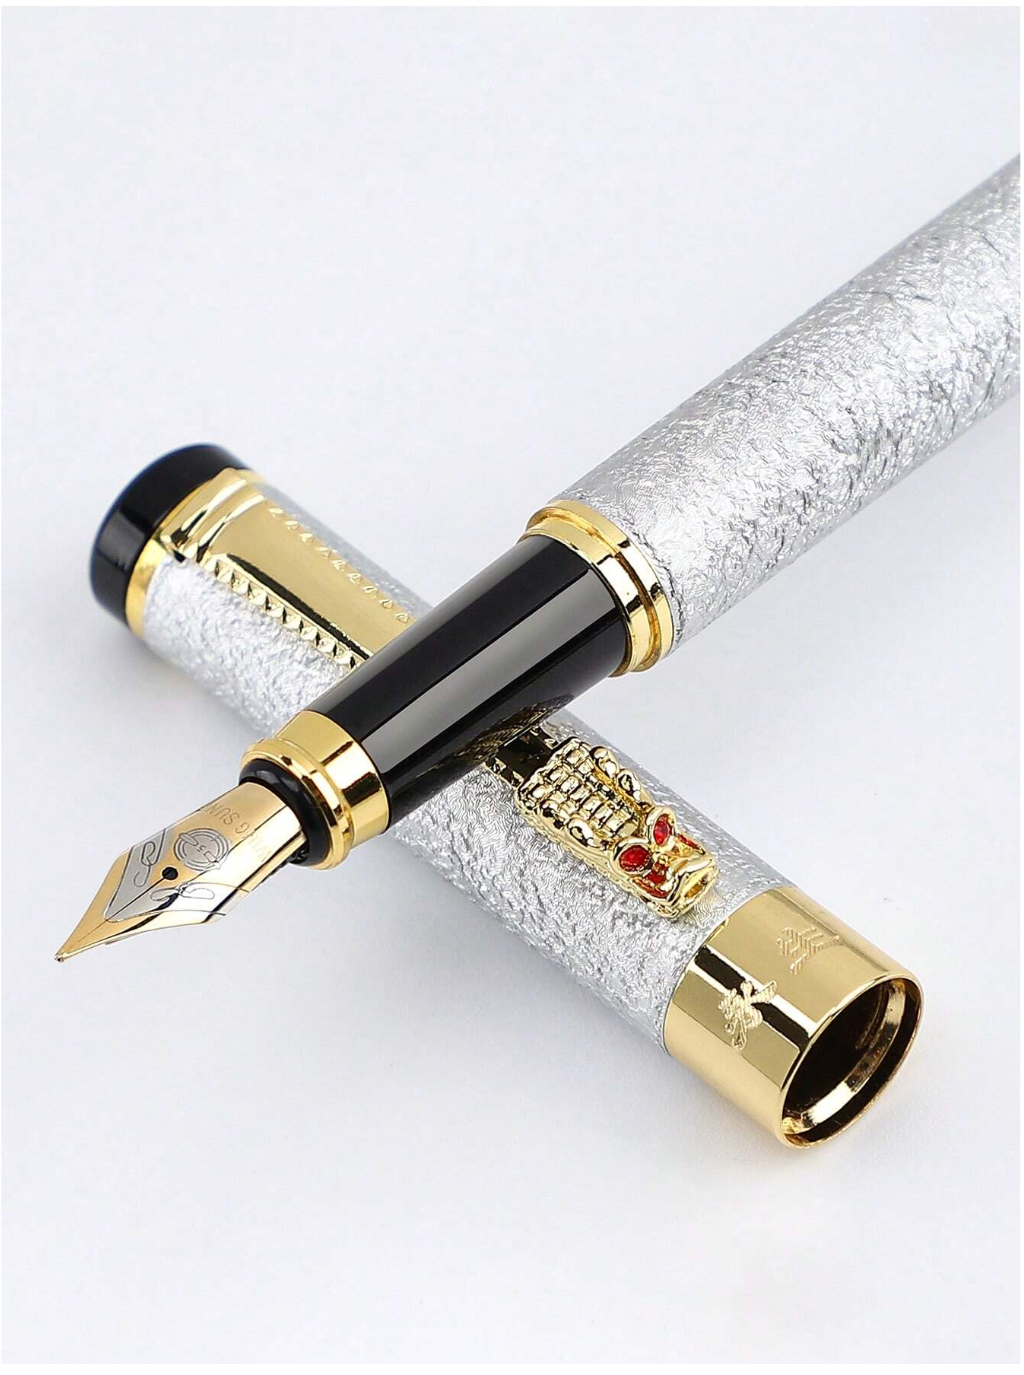 Gleam and Flow: Embrace Elegance with Our Singular Metallic Fountain Pen!